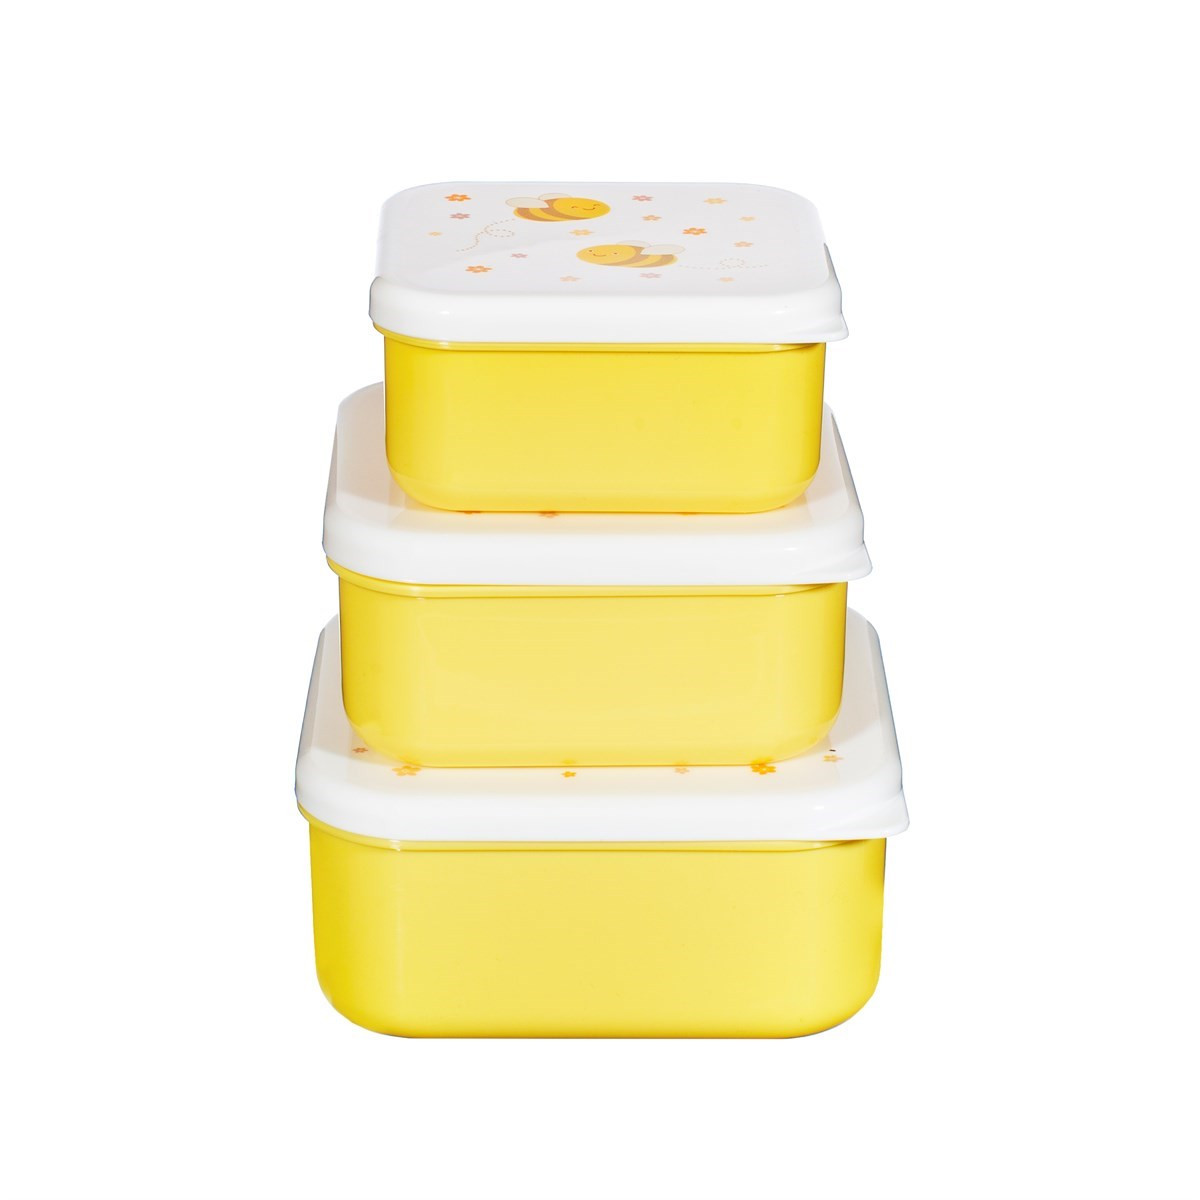 Sass & Belle Bee Happy Lunch Boxes, Cream - 3 Pack>